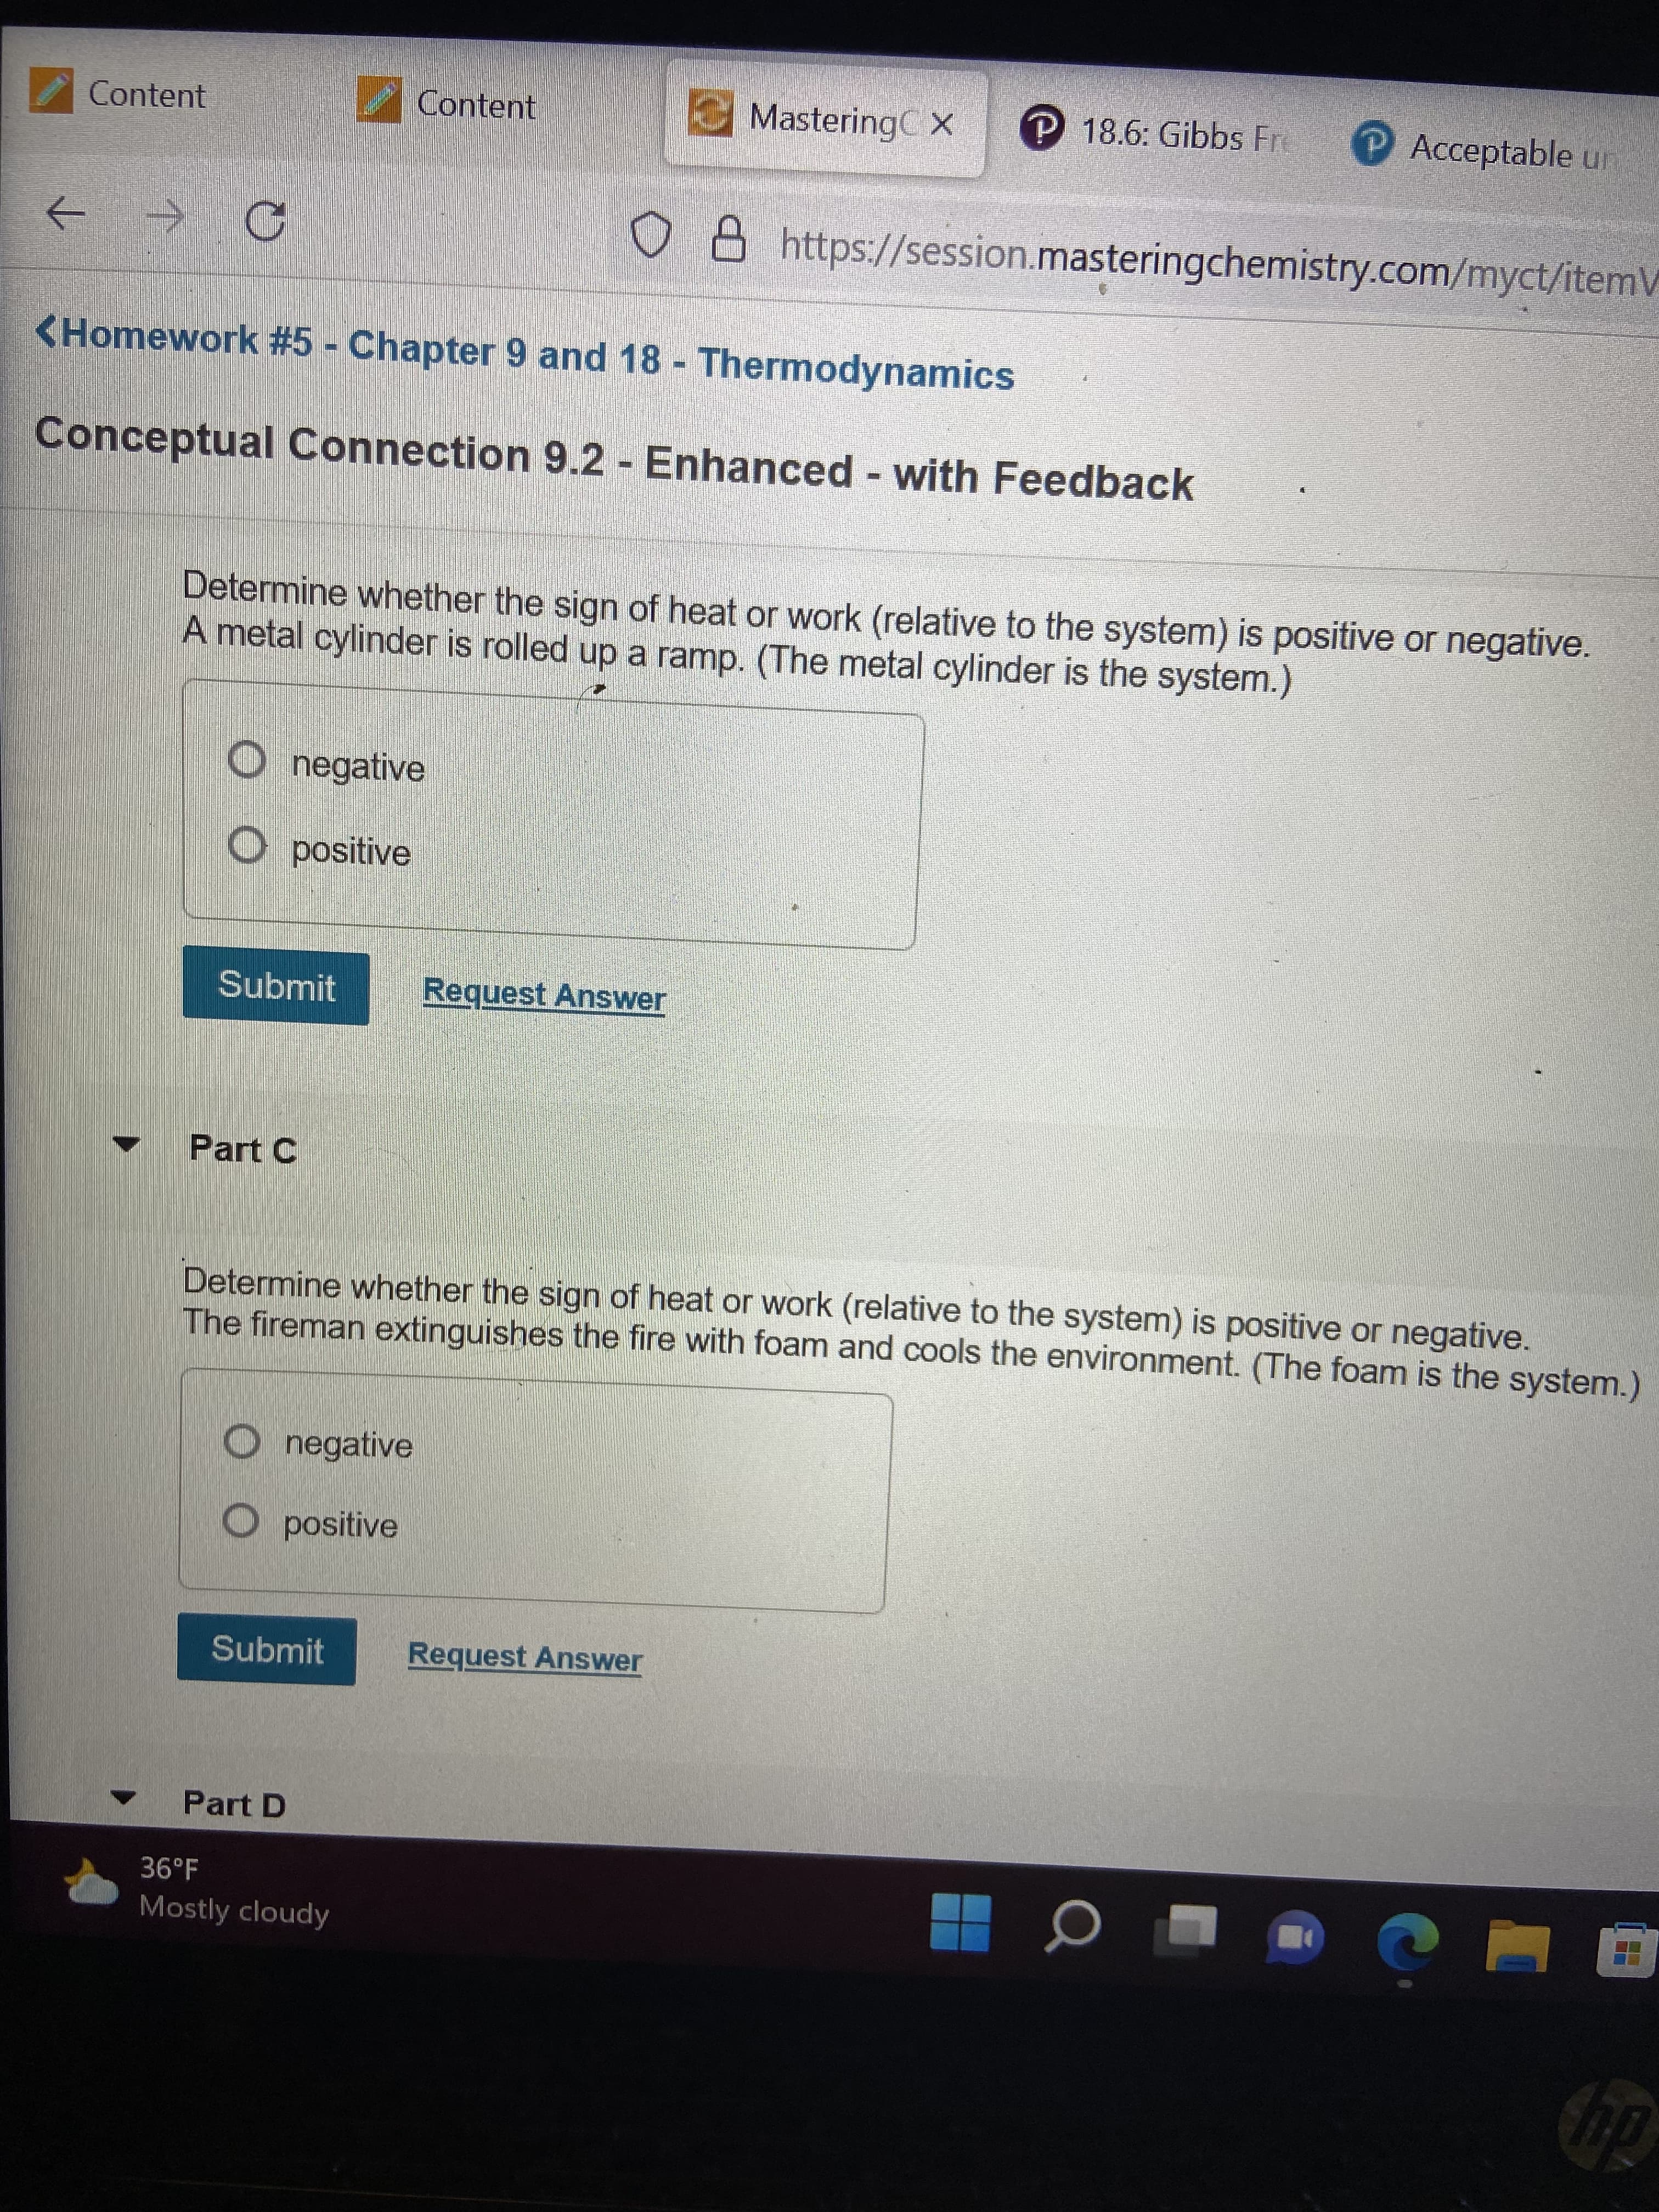 Content
Content
MasteringC x
P 18.6: Gibbs Fre
PAcceptable ur
o B https://session.masteringchemistry.com/myct/itemV
->
<Homework #5 - Chapter 9 and 18 - Thermodynamics
Conceptual Connection 9.2 - Enhanced - with Feedback
Determine whether the sign of heat or work (relative to the system) is positive or negative.
A metal cylinder is rolled up a ramp. (The metal cylinder is the system.)
O negative
O positive
Submit
Request Answer
Part C
Determine whether the sign of heat or work (relative to the system) is positive or negative.
The fireman extinguishes the fire with foam and cools the environment. (The foam is the system.)
O negative
O positive
Submit
Request Answer
Part D
36°F
Mostly cloudy
